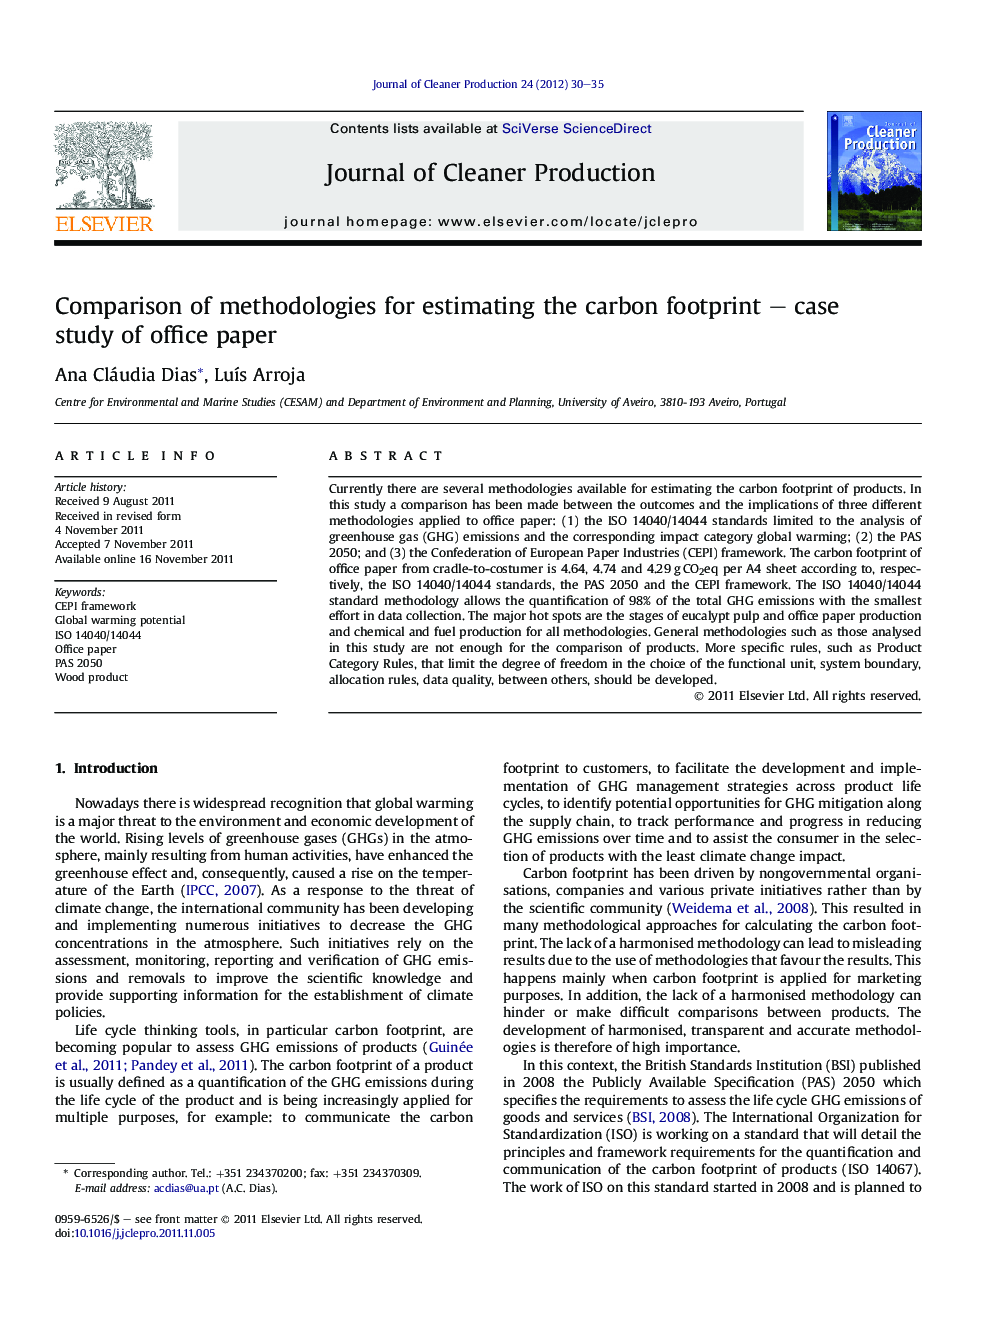 Comparison of methodologies for estimating the carbon footprint – case study of office paper